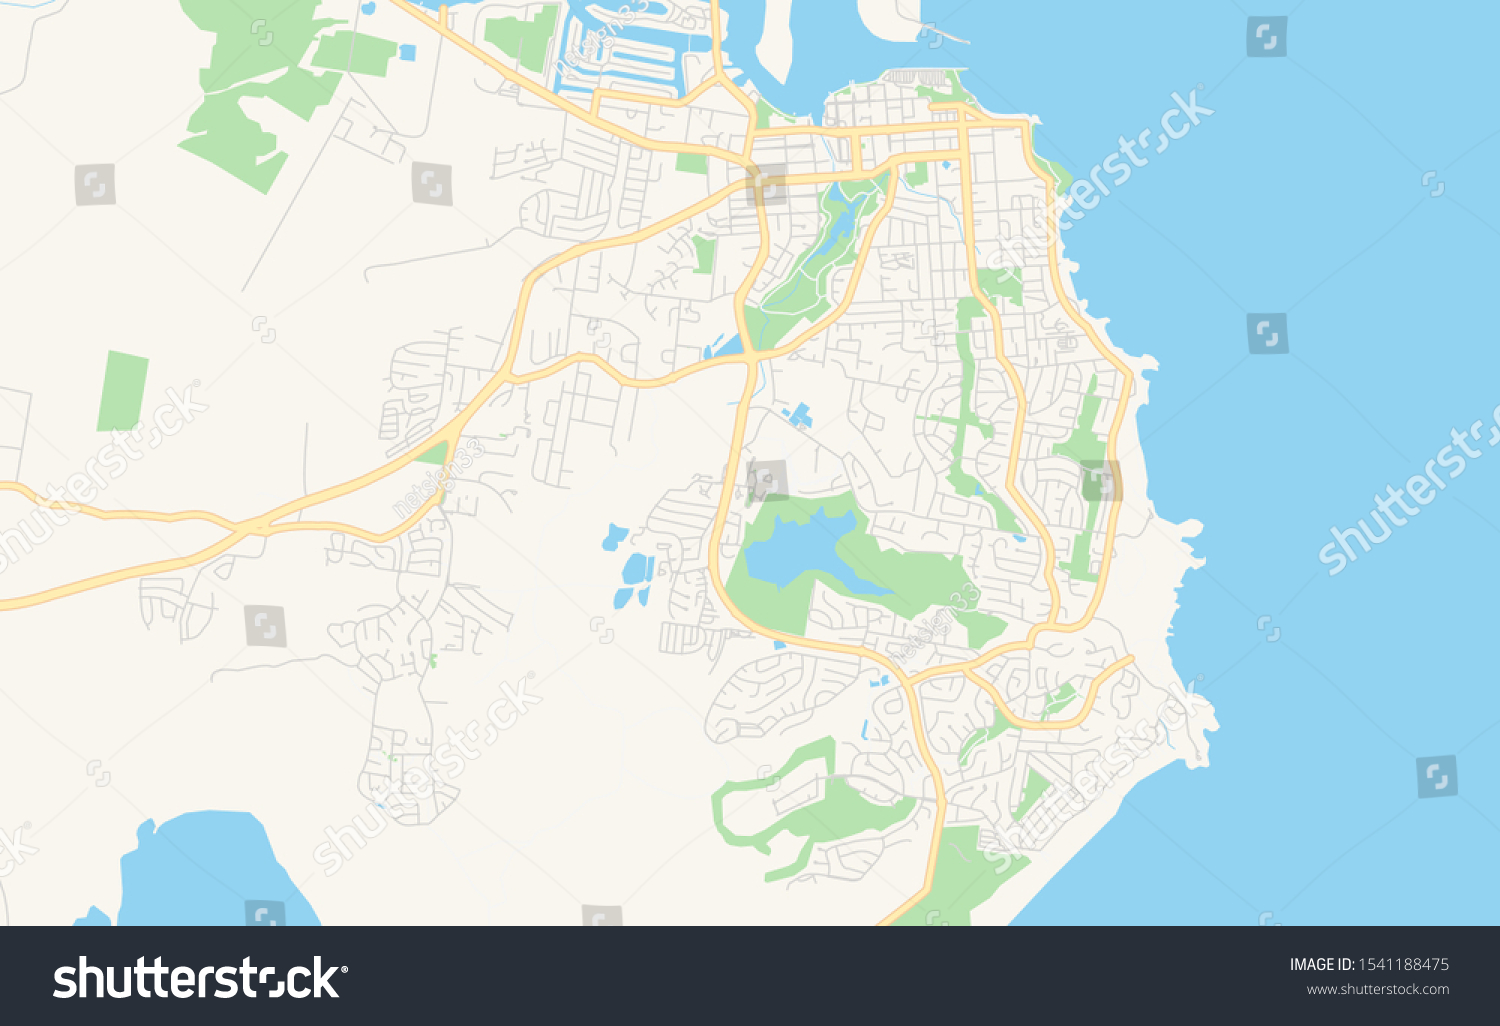 Stock Vector Printable Street Map Of Port Macquarie Australia Map Template For Business Use 1541188475 